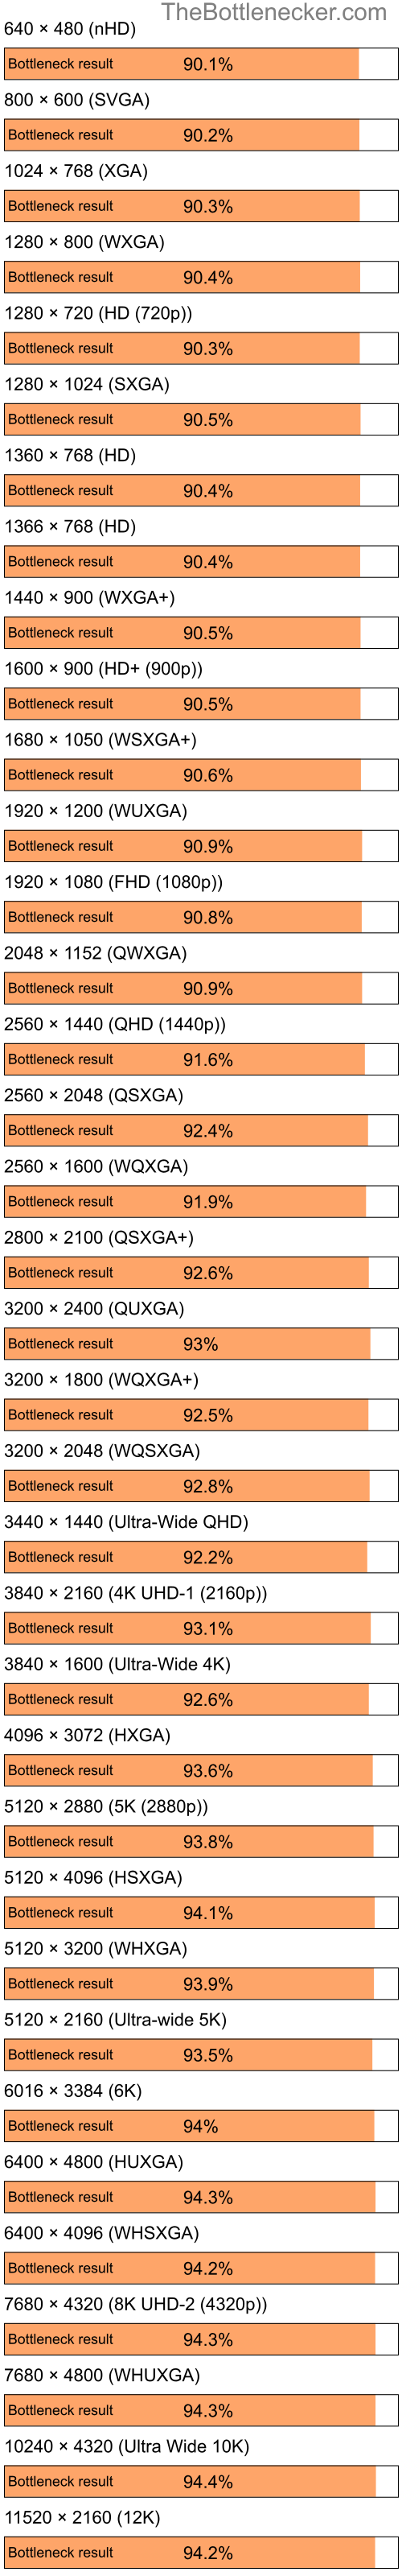 Bottleneck results by resolution for Intel Pentium 4 and AMD Radeon 9250 in General Tasks